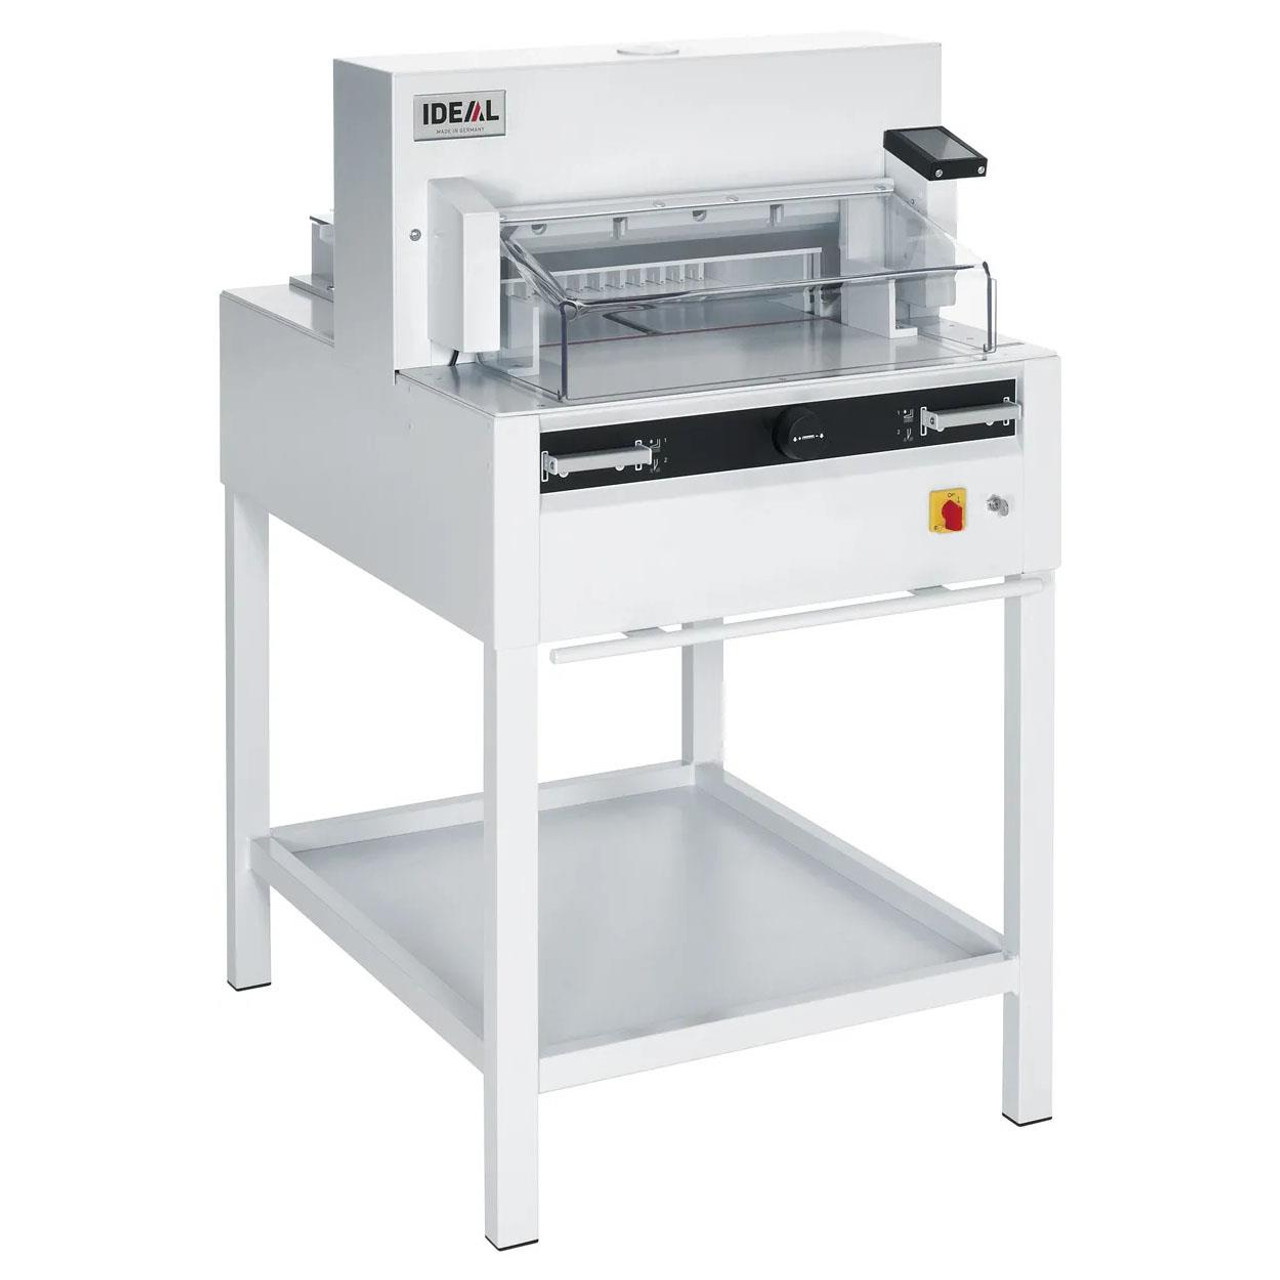 IDEAL 4855 Paper Guillotine